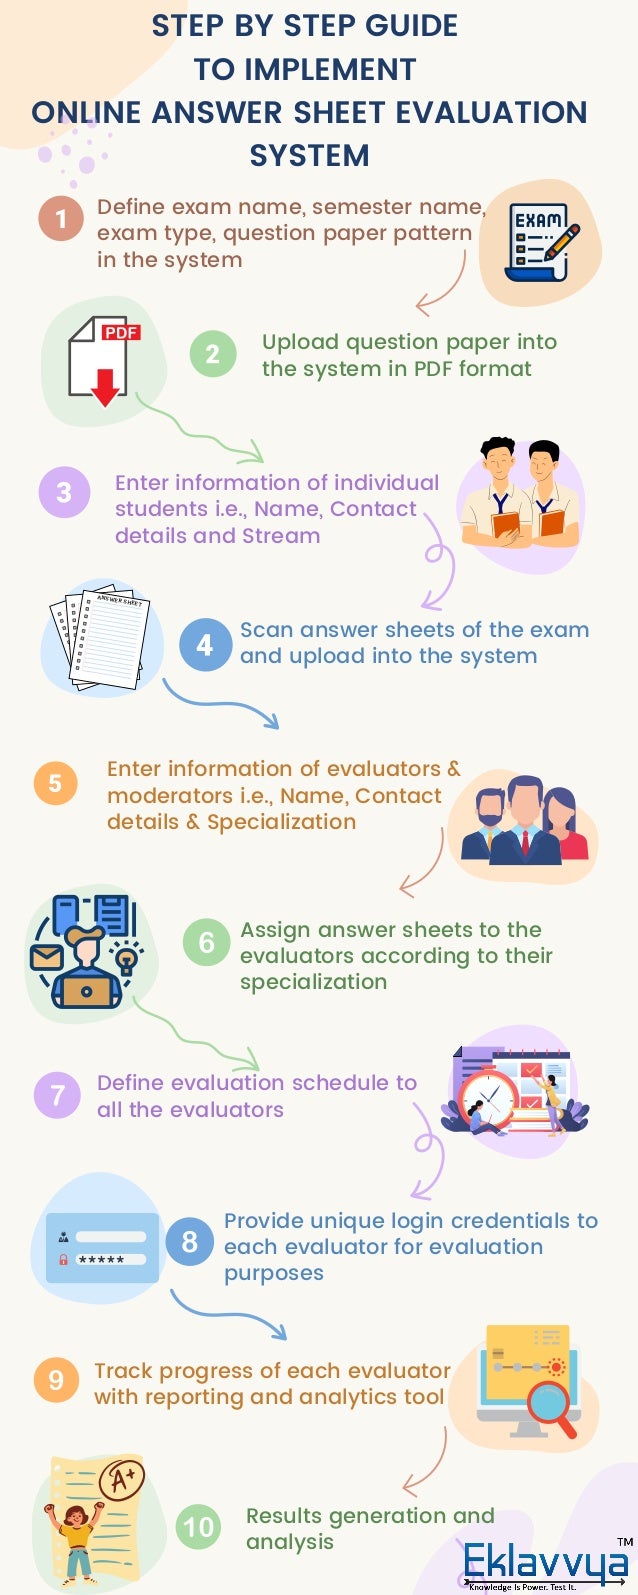 STEP BY STEP GUIDE
TO IMPLEMENT
ONLINE ANSWER SHEET EVALUATION
SYSTEM
Define evaluation schedule to
all the evaluators
Define exam name, semester name,
exam type, question paper pattern
in the system
Upload question paper into
the system in PDF format
Enter information of individual
students i.e., Name, Contact
details and Stream
Scan answer sheets of the exam
and upload into the system
Enter information of evaluators &
moderators i.e., Name, Contact
details & Specialization
Assign answer sheets to the
evaluators according to their
specialization
Provide unique login credentials to
each evaluator for evaluation
purposes
Track progress of each evaluator
with reporting and analytics tool
Results generation and
analysis
ANSWER SHEET
 